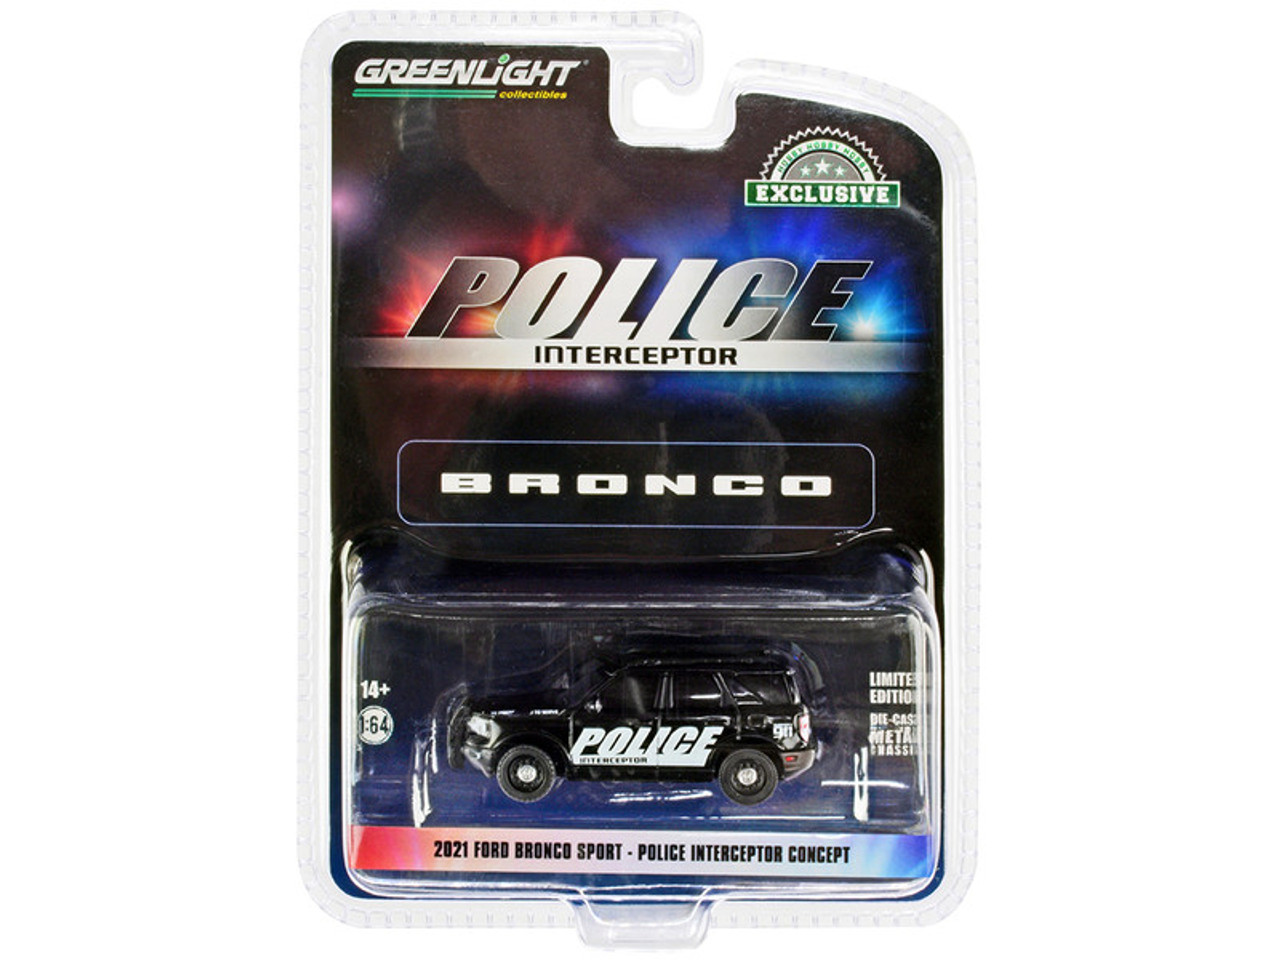 2021 Ford Bronco Sport Police Interceptor Concept Black "Hobby Exclusive" 1/64 Diecast Model Car by Greenlight